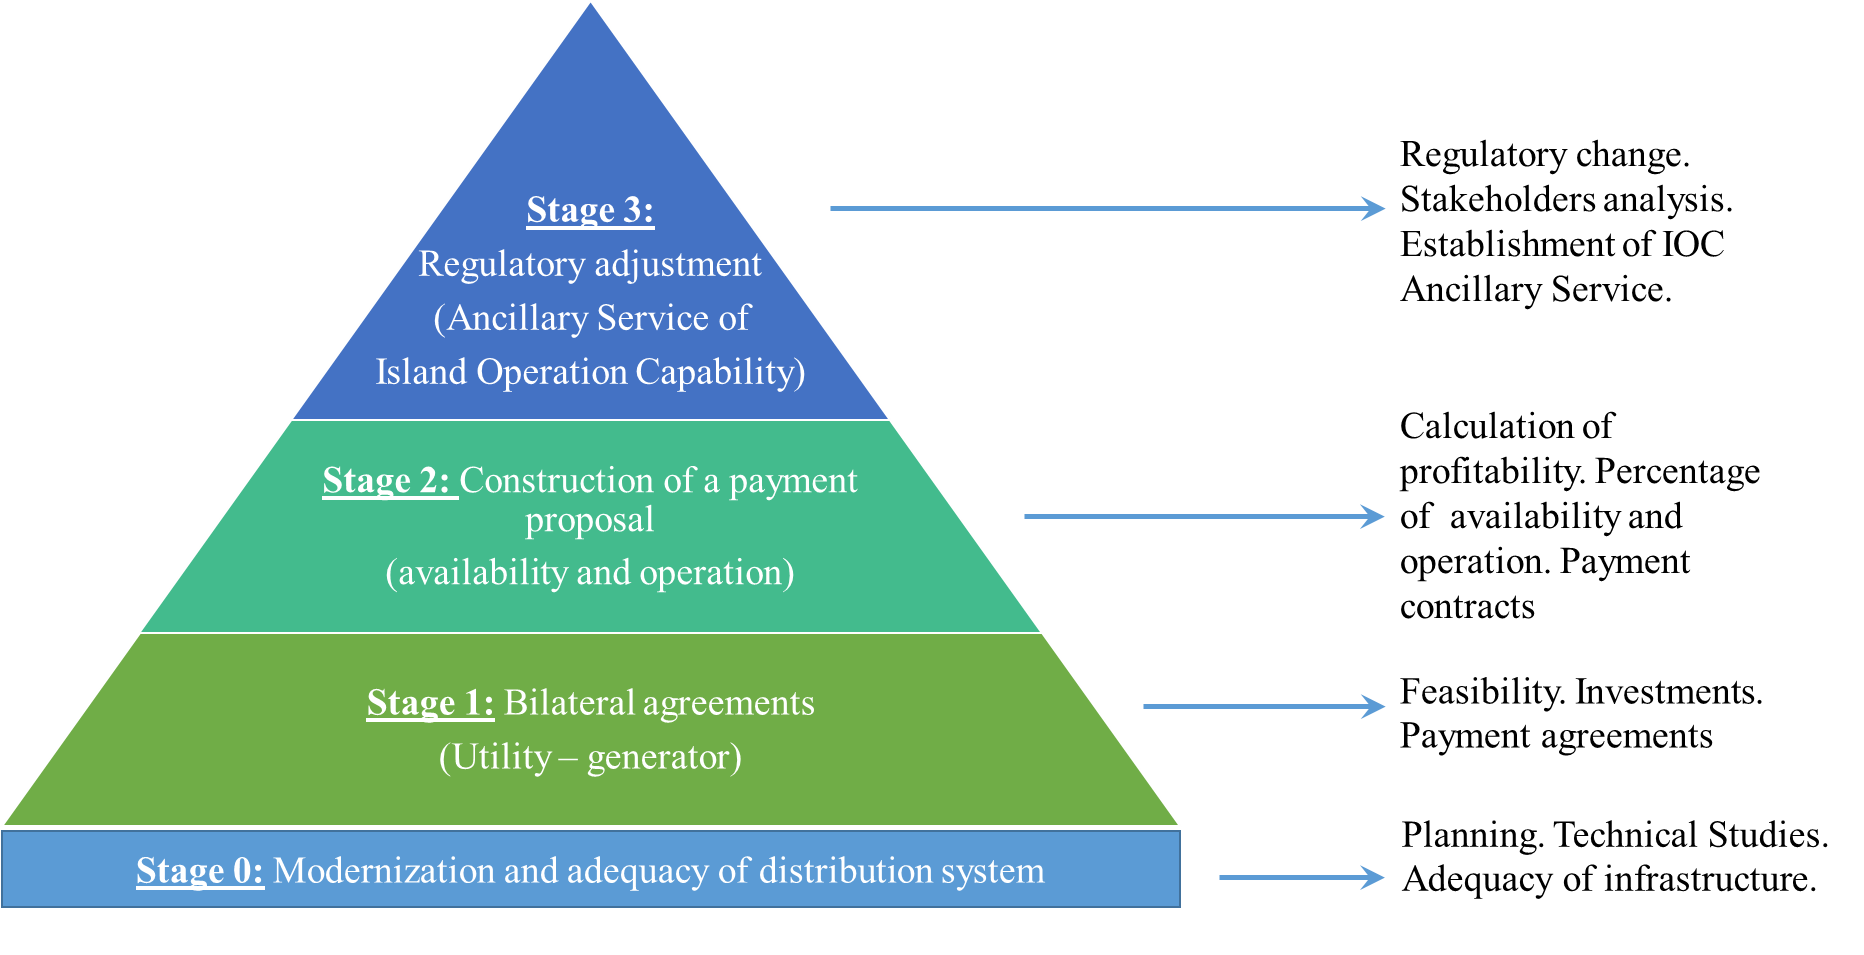 Proposed regulation of the implementation of
the Ancillary Service of Island Operation Capability.